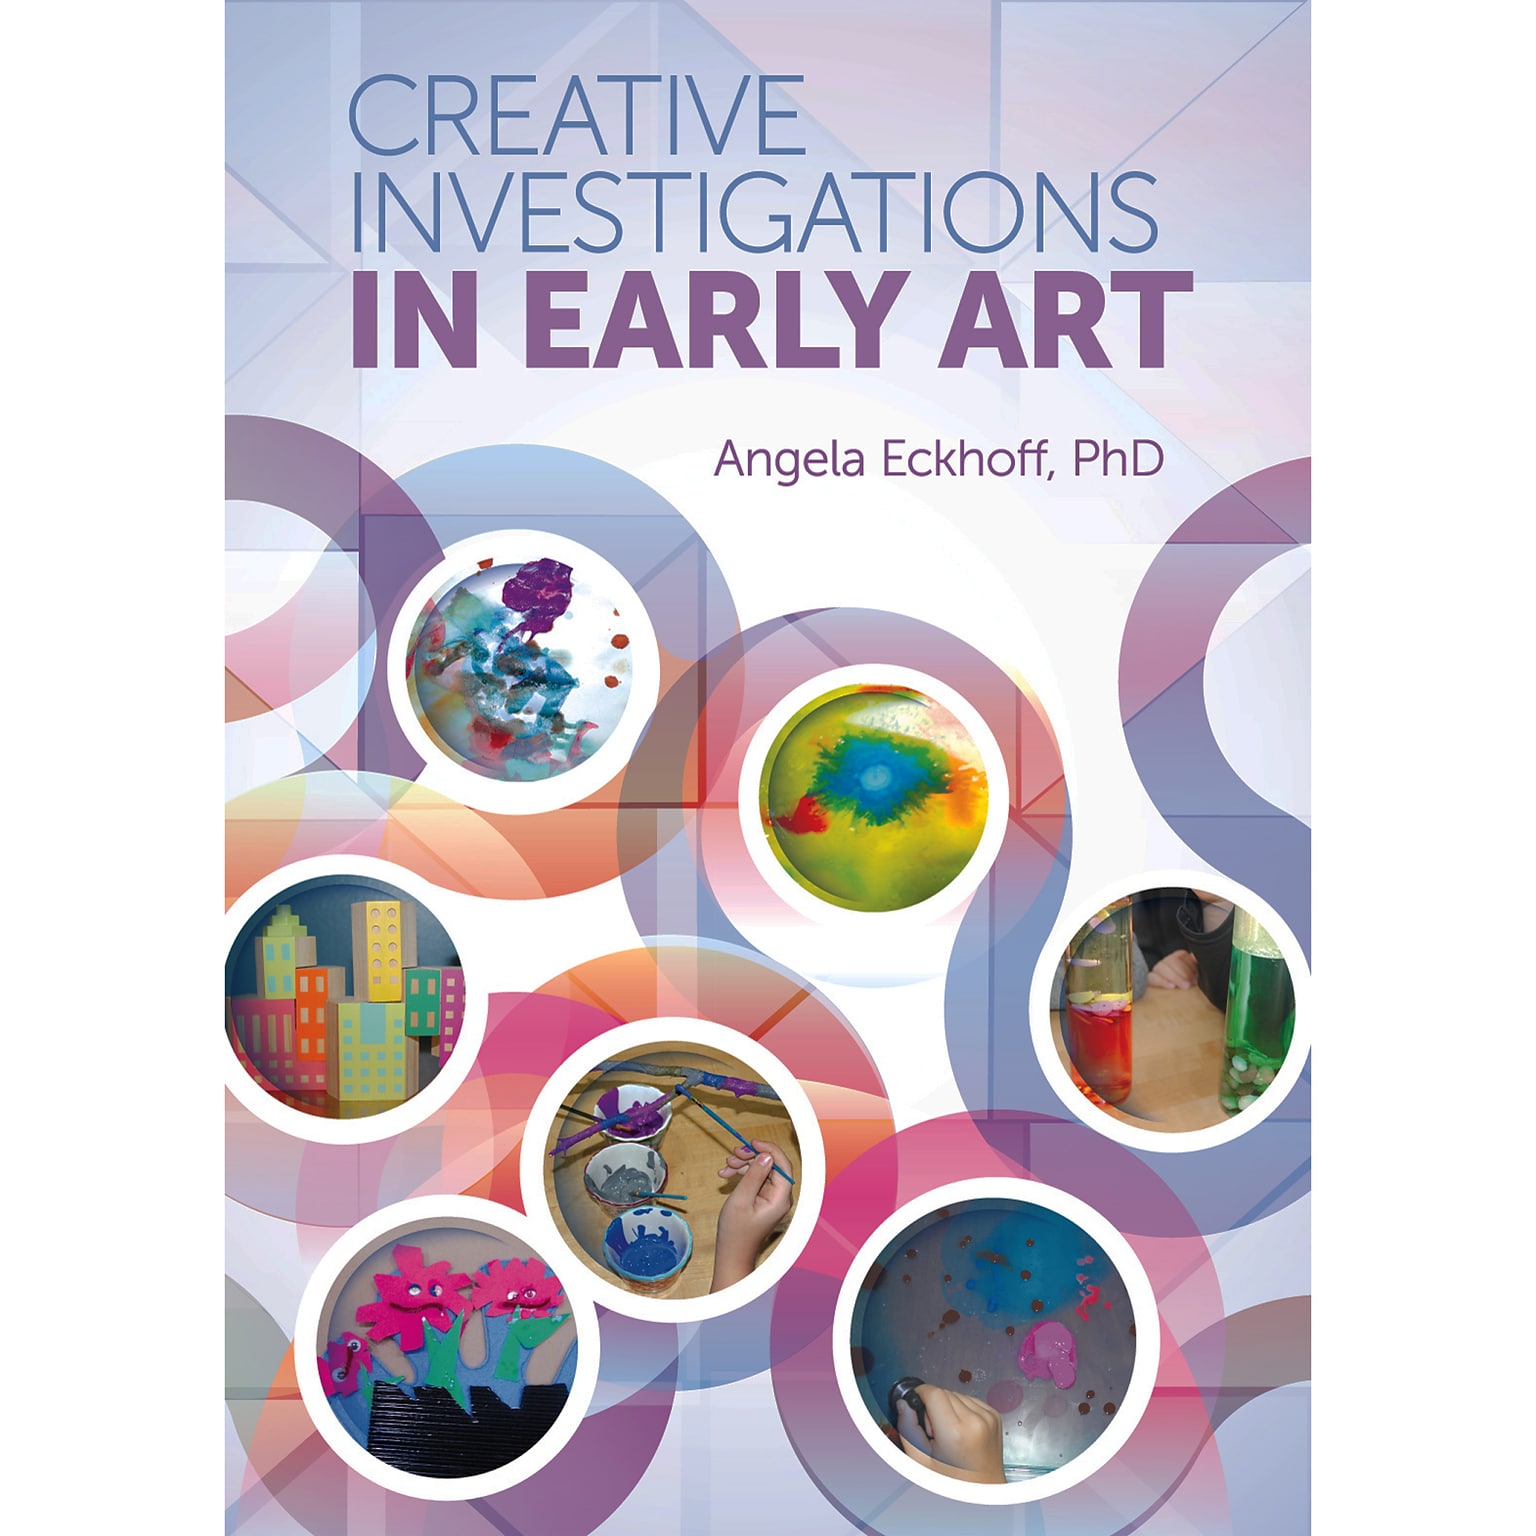 Creative Investigations in Early Art by Angela Eckhoff, PhD, Printed (9780876598061)